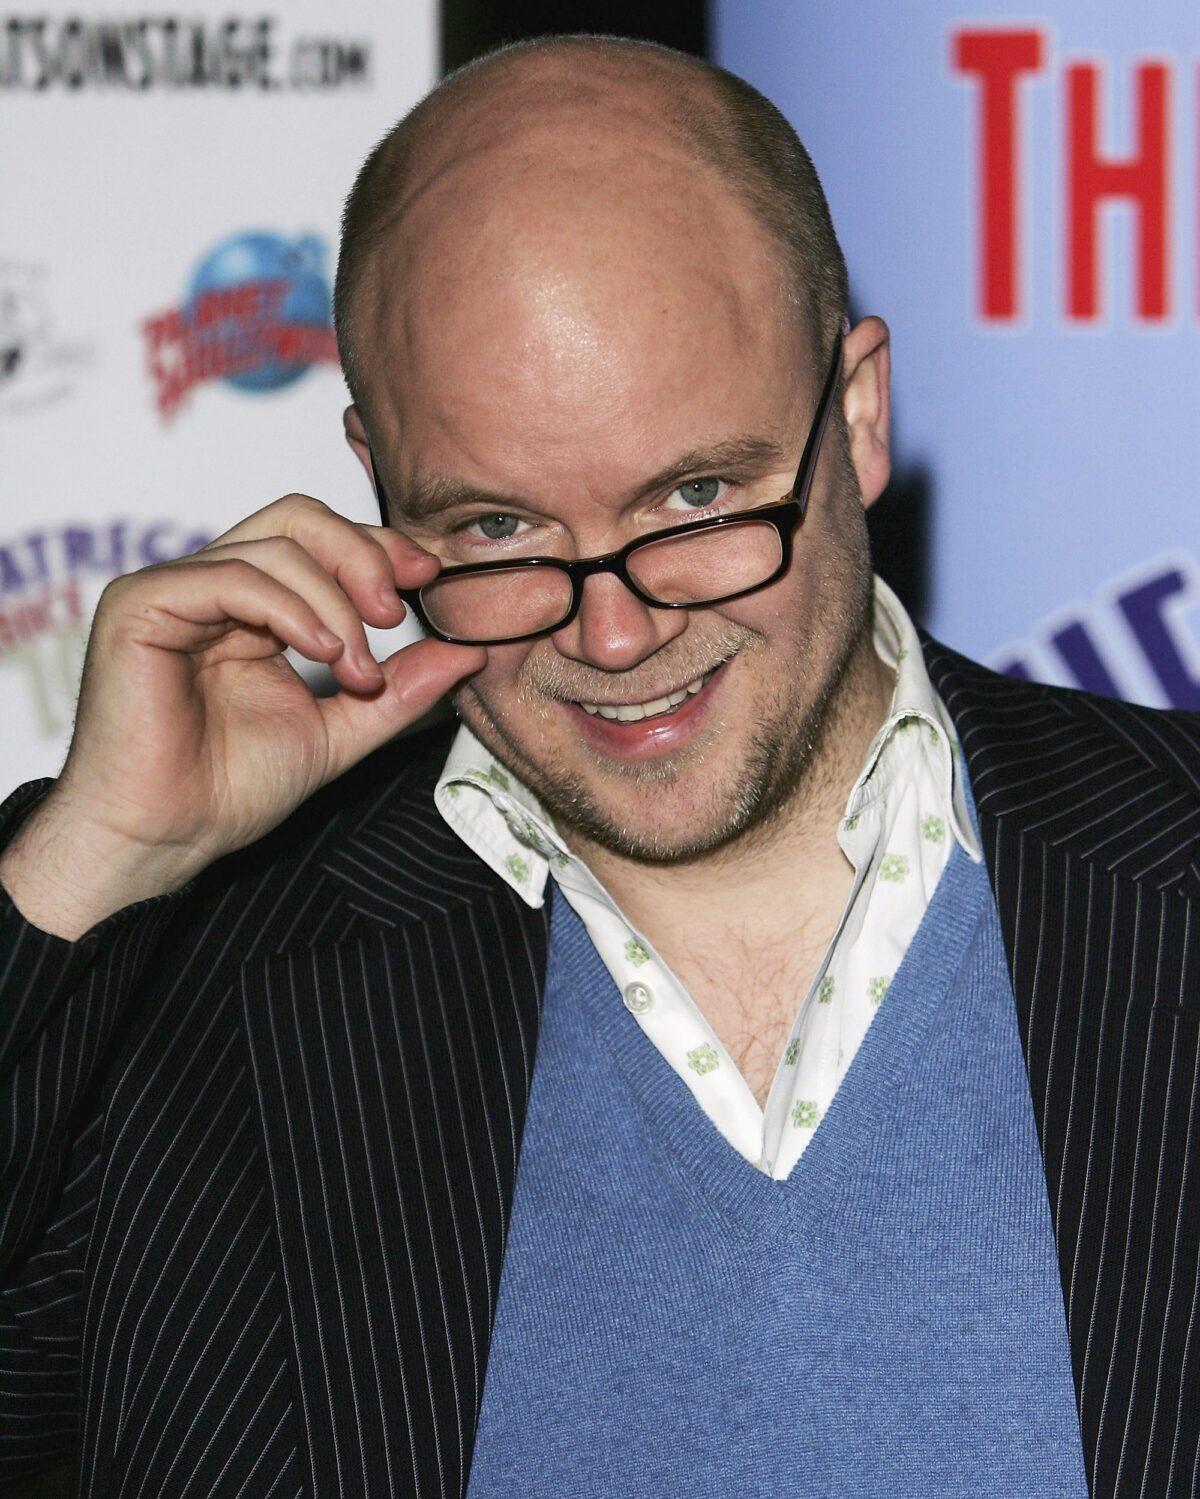 Toby Young attends the press launch for the Theatregoers' Choice Awards at Planet Hollywood in London, on Nov. 30, 2005. (MJ Kim/Getty Images)